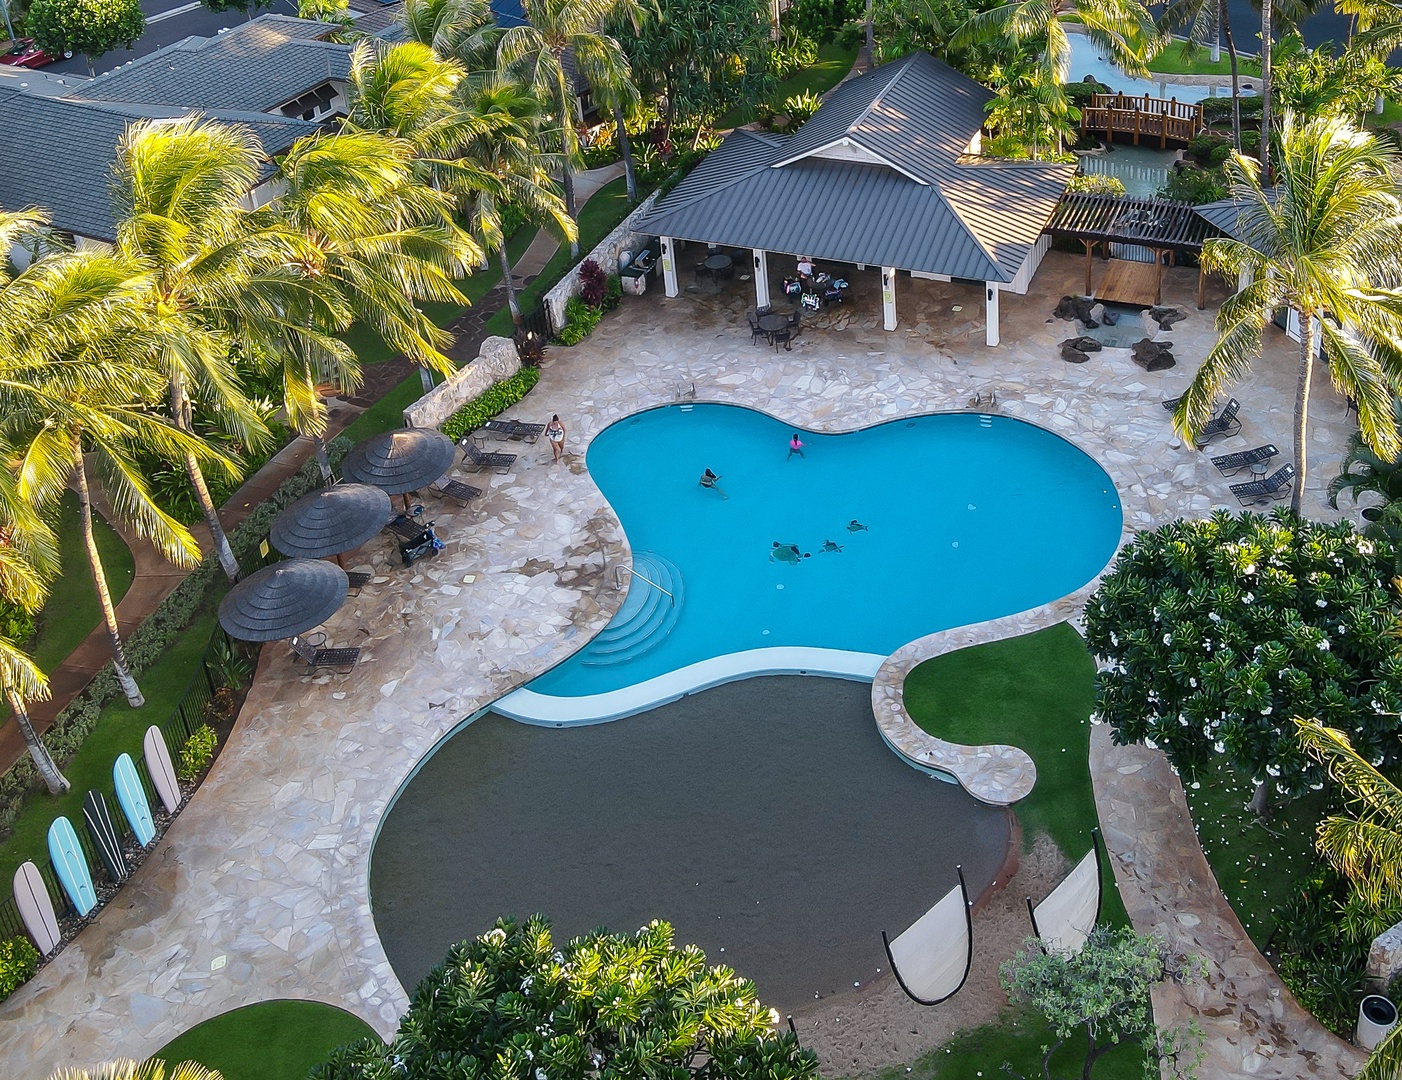 Kapolei Vacation Rentals, Coconut Plantation 1100-2 - An aerial view of the lounge chairs and cabana by the pool.